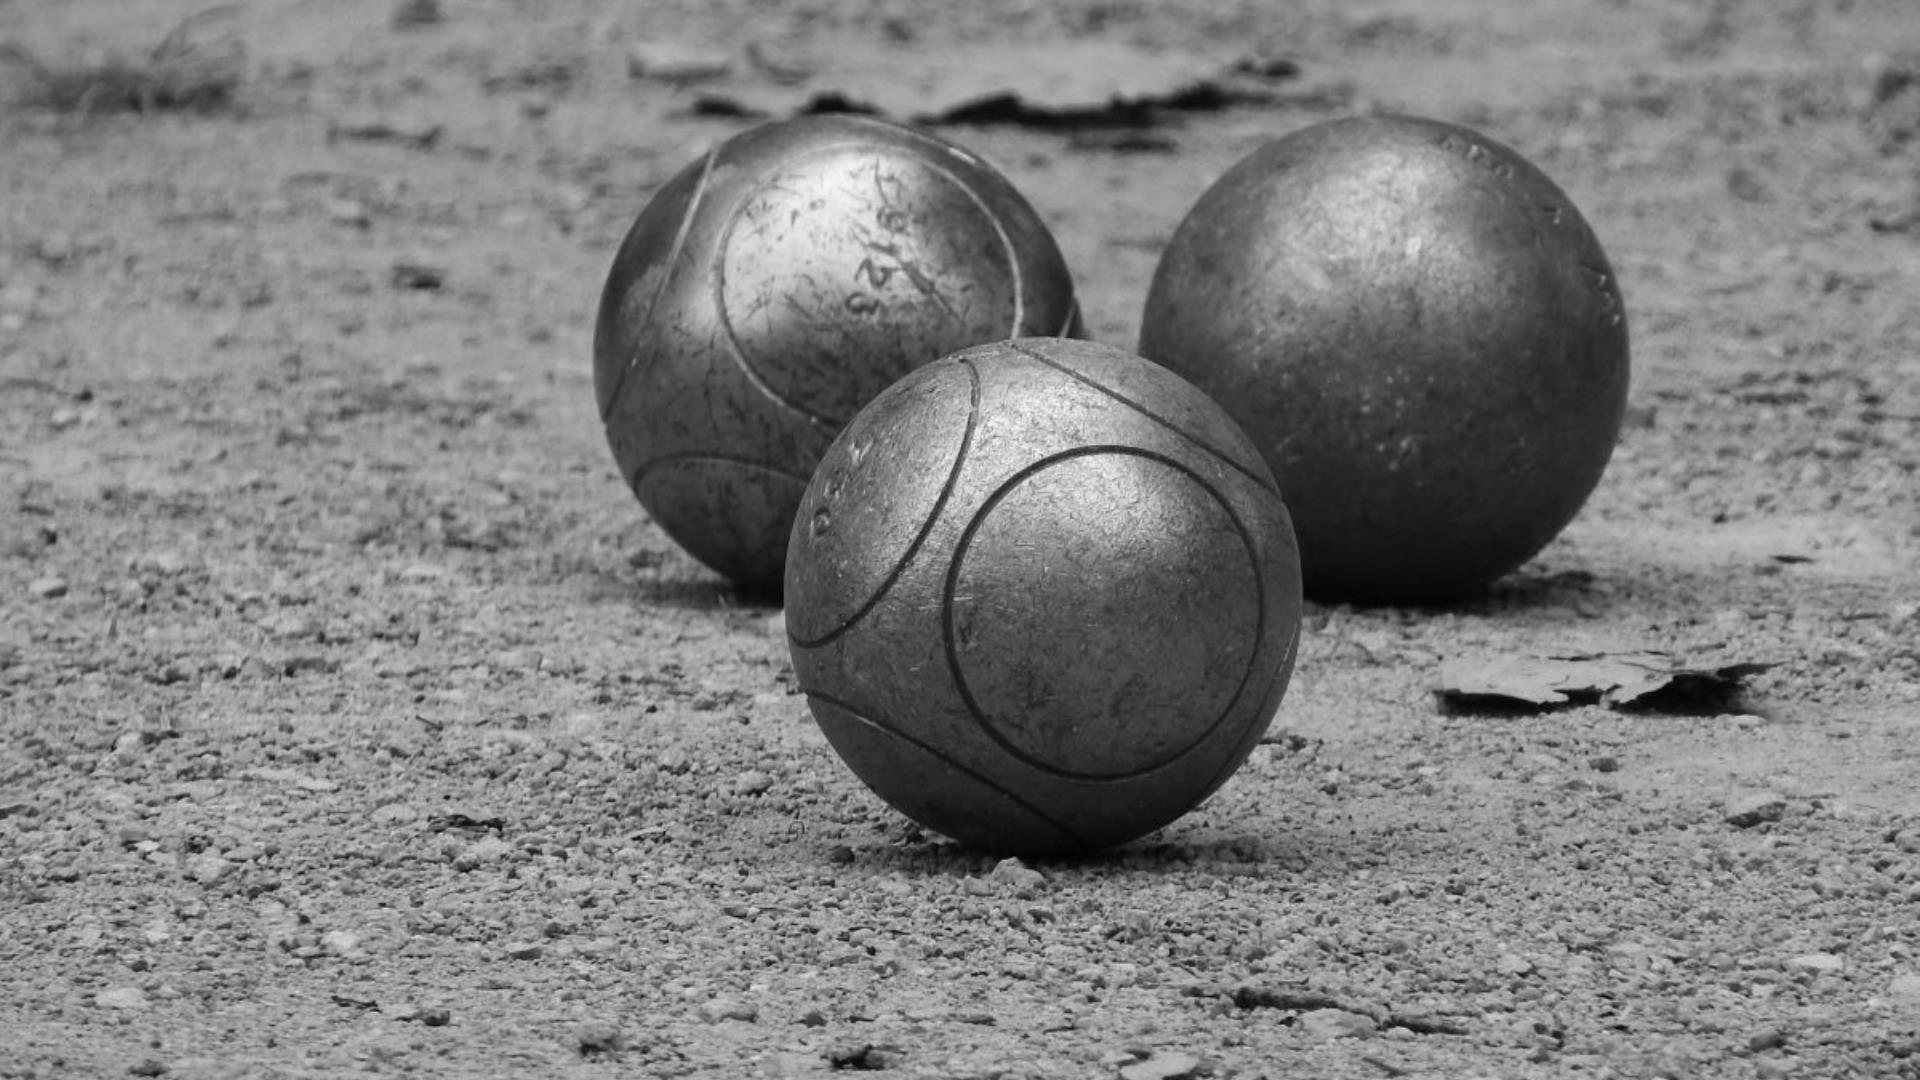 sand-black-and-white-white-photography-game-france-black-monochrome-close-up-sports-ball-traditional-monochrome-photography-petanque-lawn-game-1265480